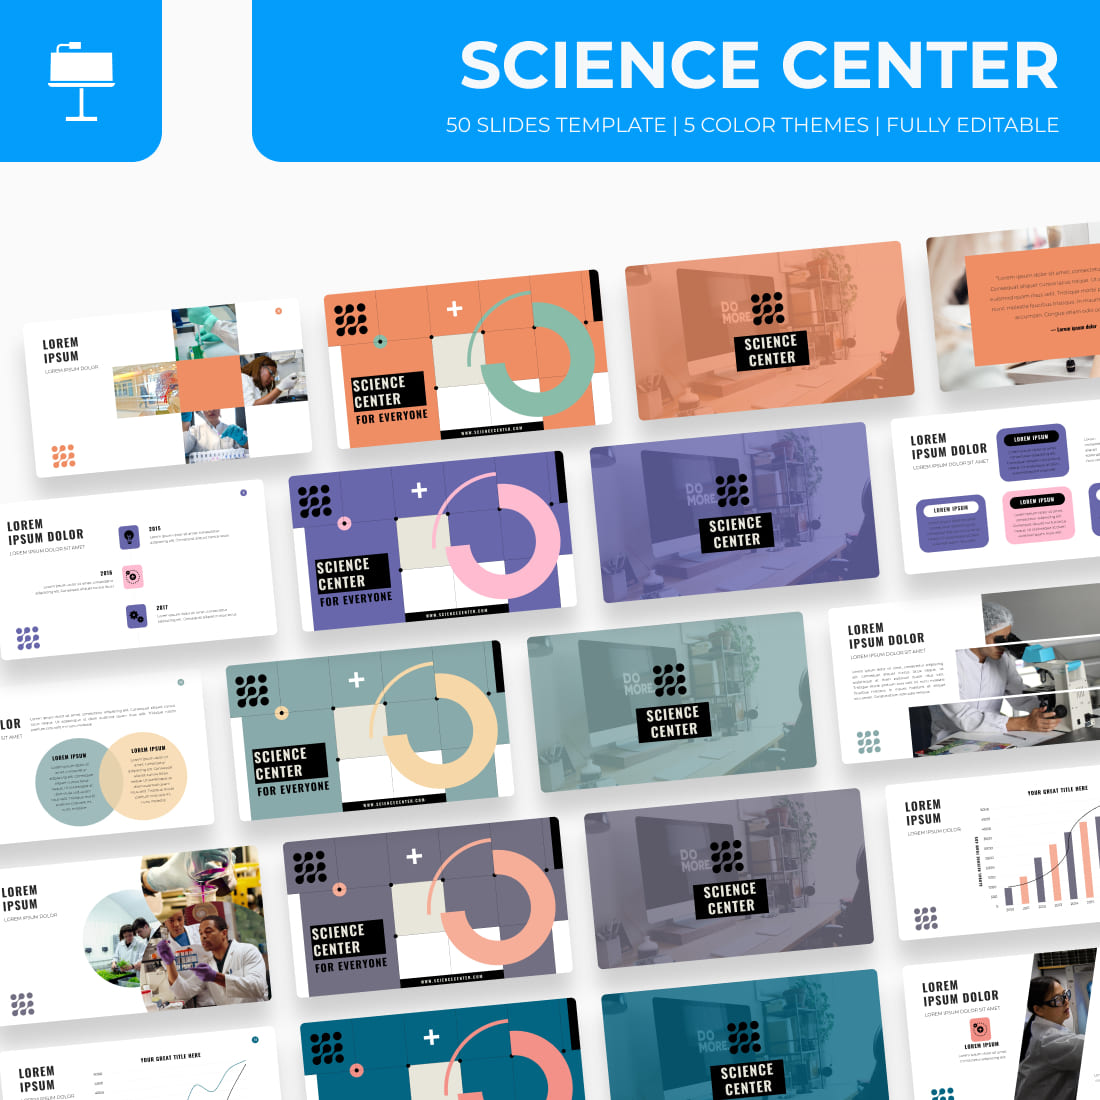 Science Center Keynote Template.